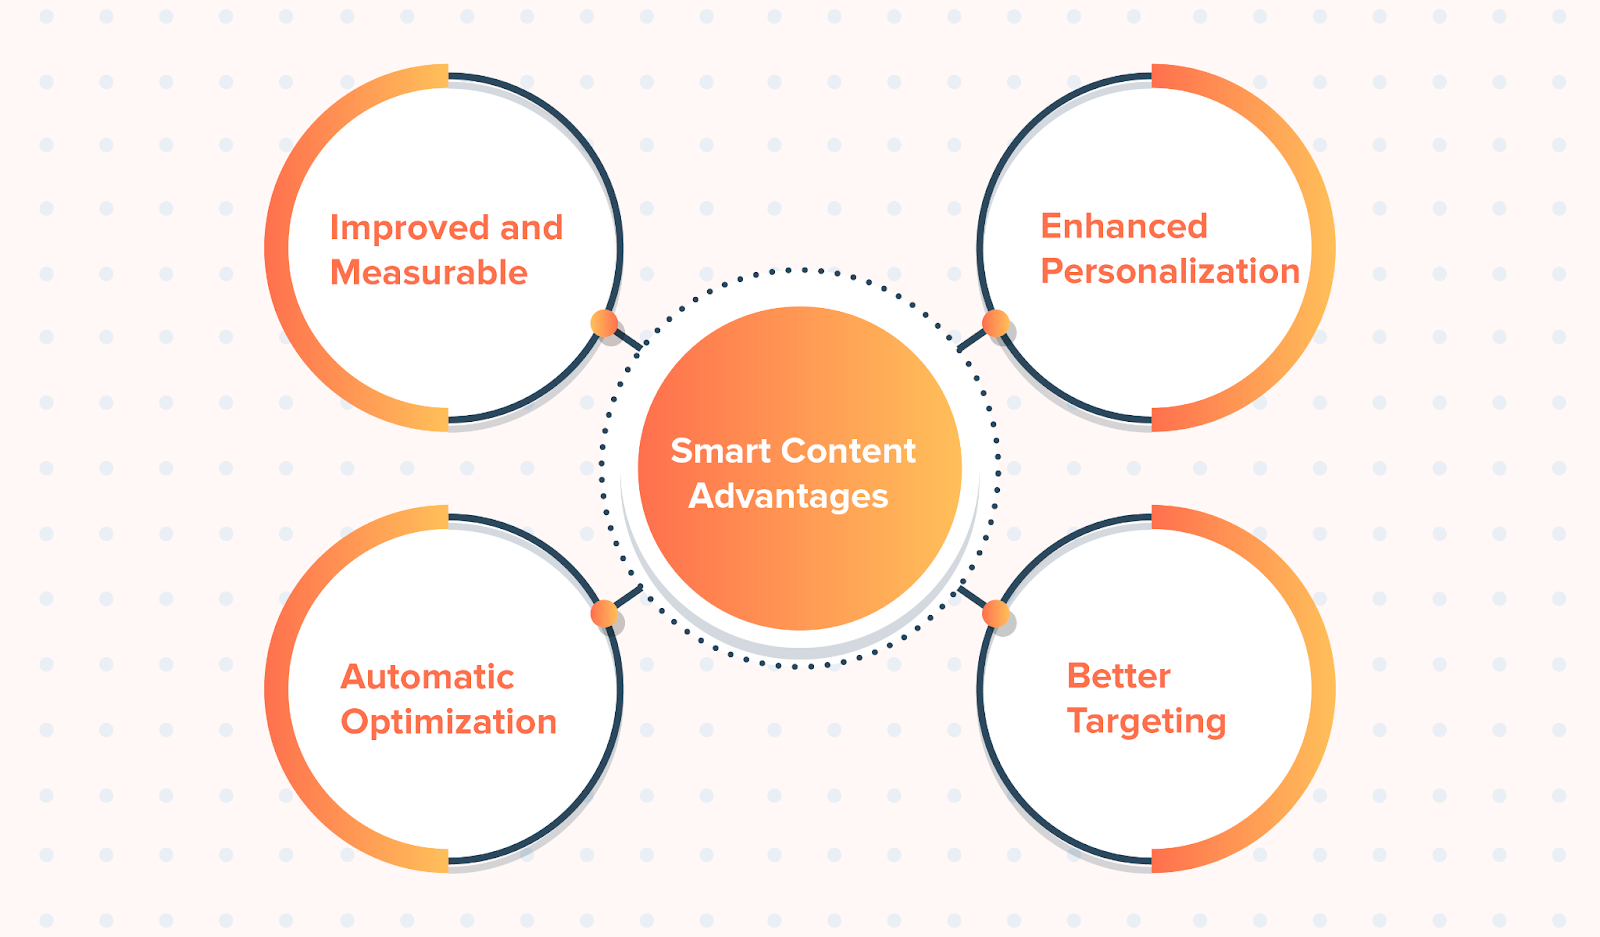 How does smart content work in HubSpot?